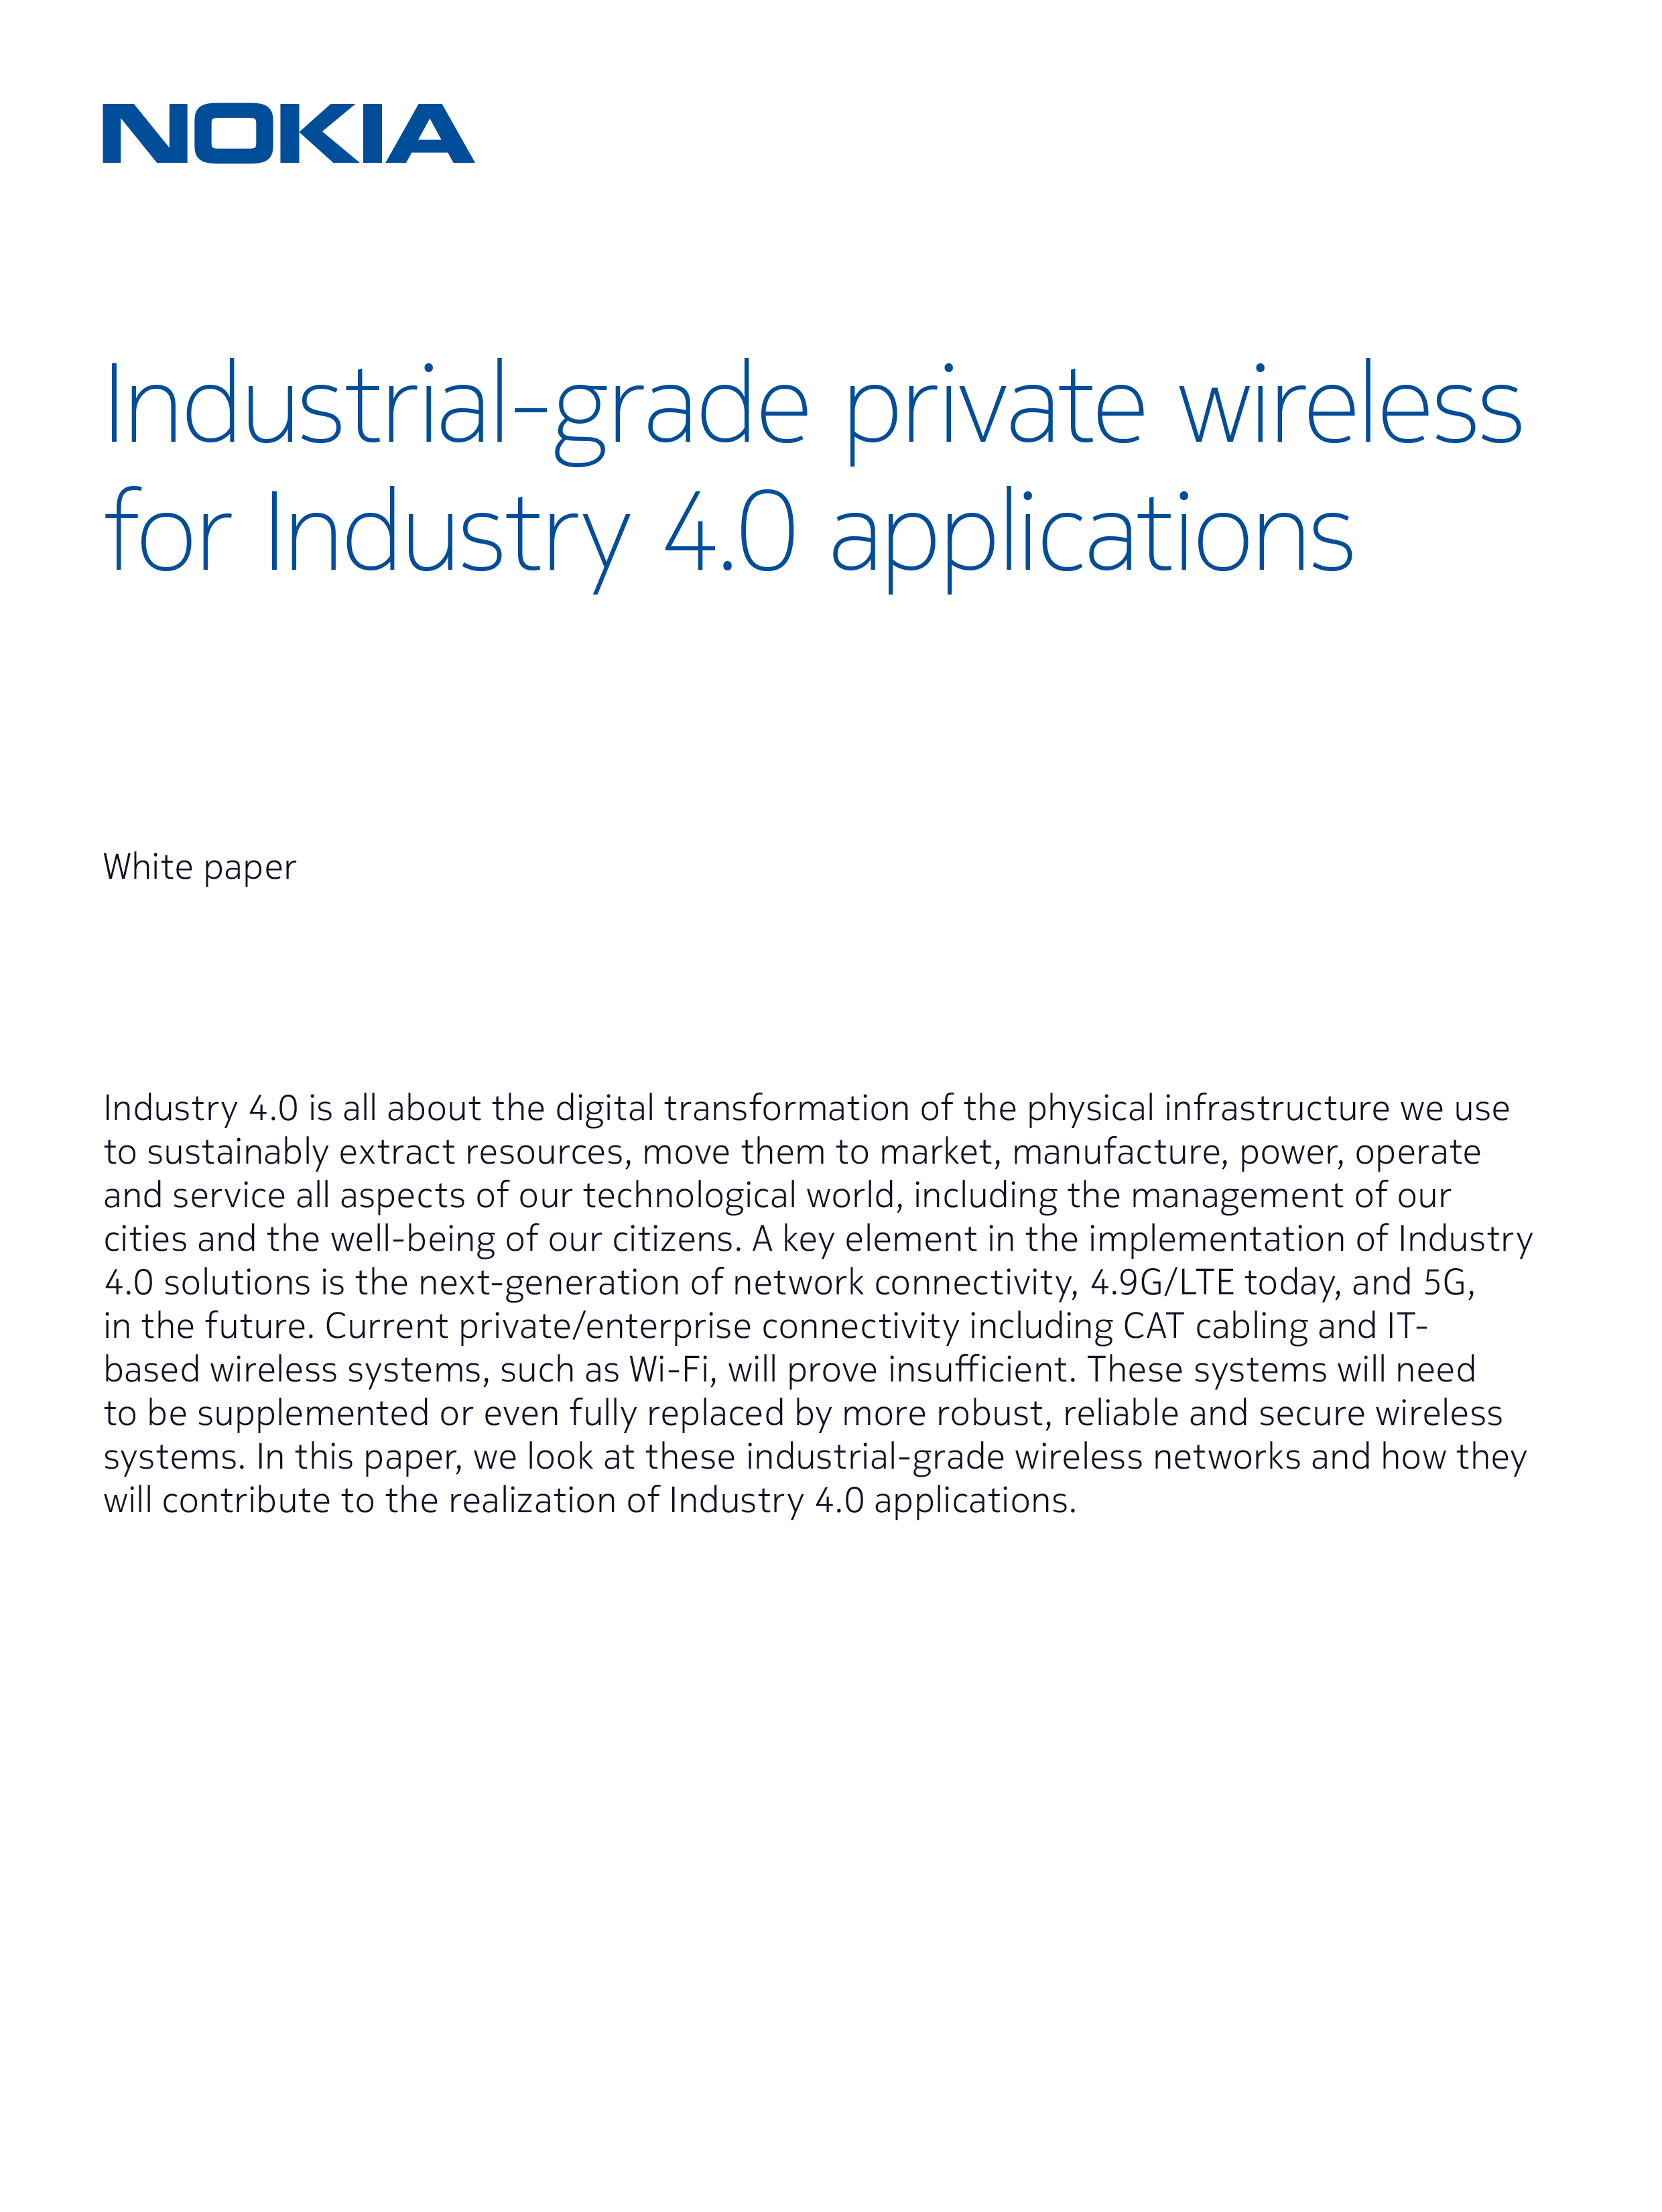 Whitepaper: Industrial-grade private wireless for Industry 4.0 applications image